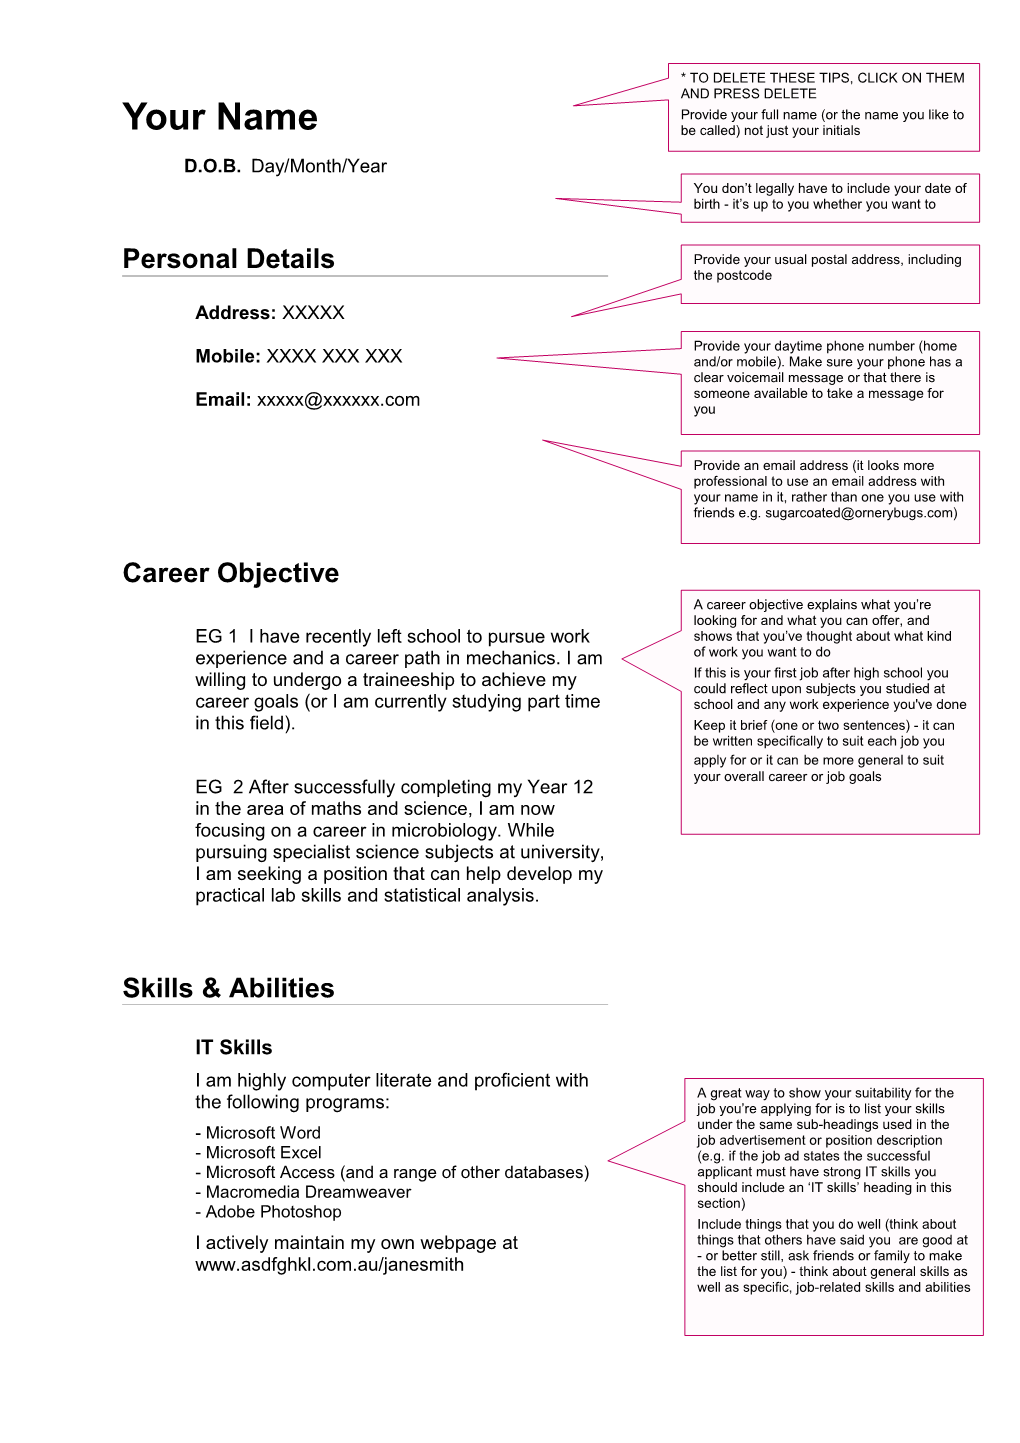 Resume Template - Completed Year 12, No Experience